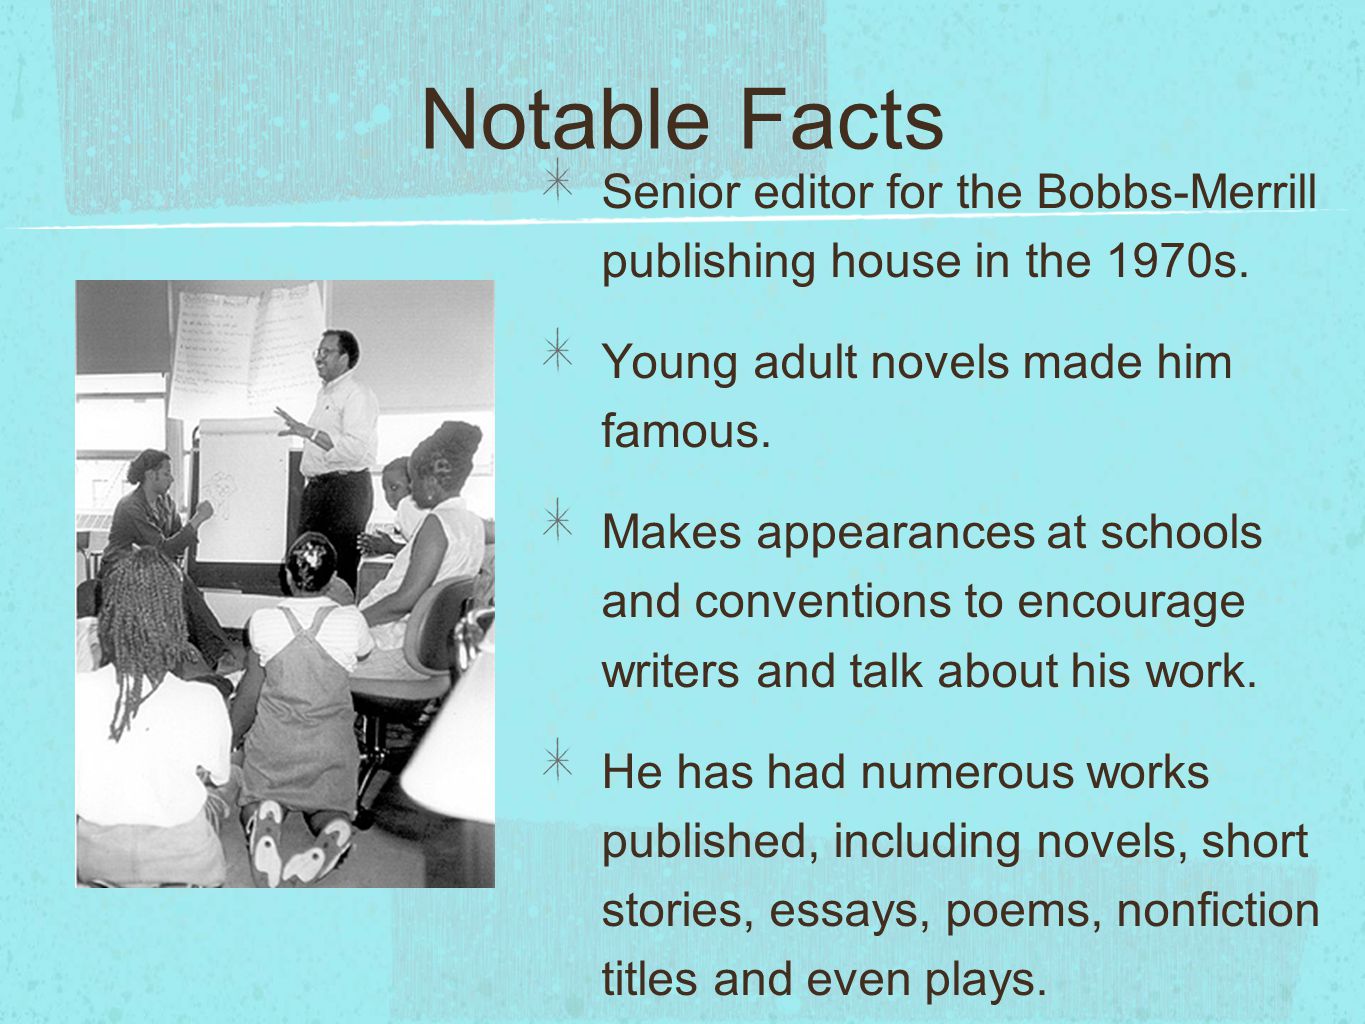 Notable Facts Senior editor for the Bobbs-Merrill publishing house in the 1970s.